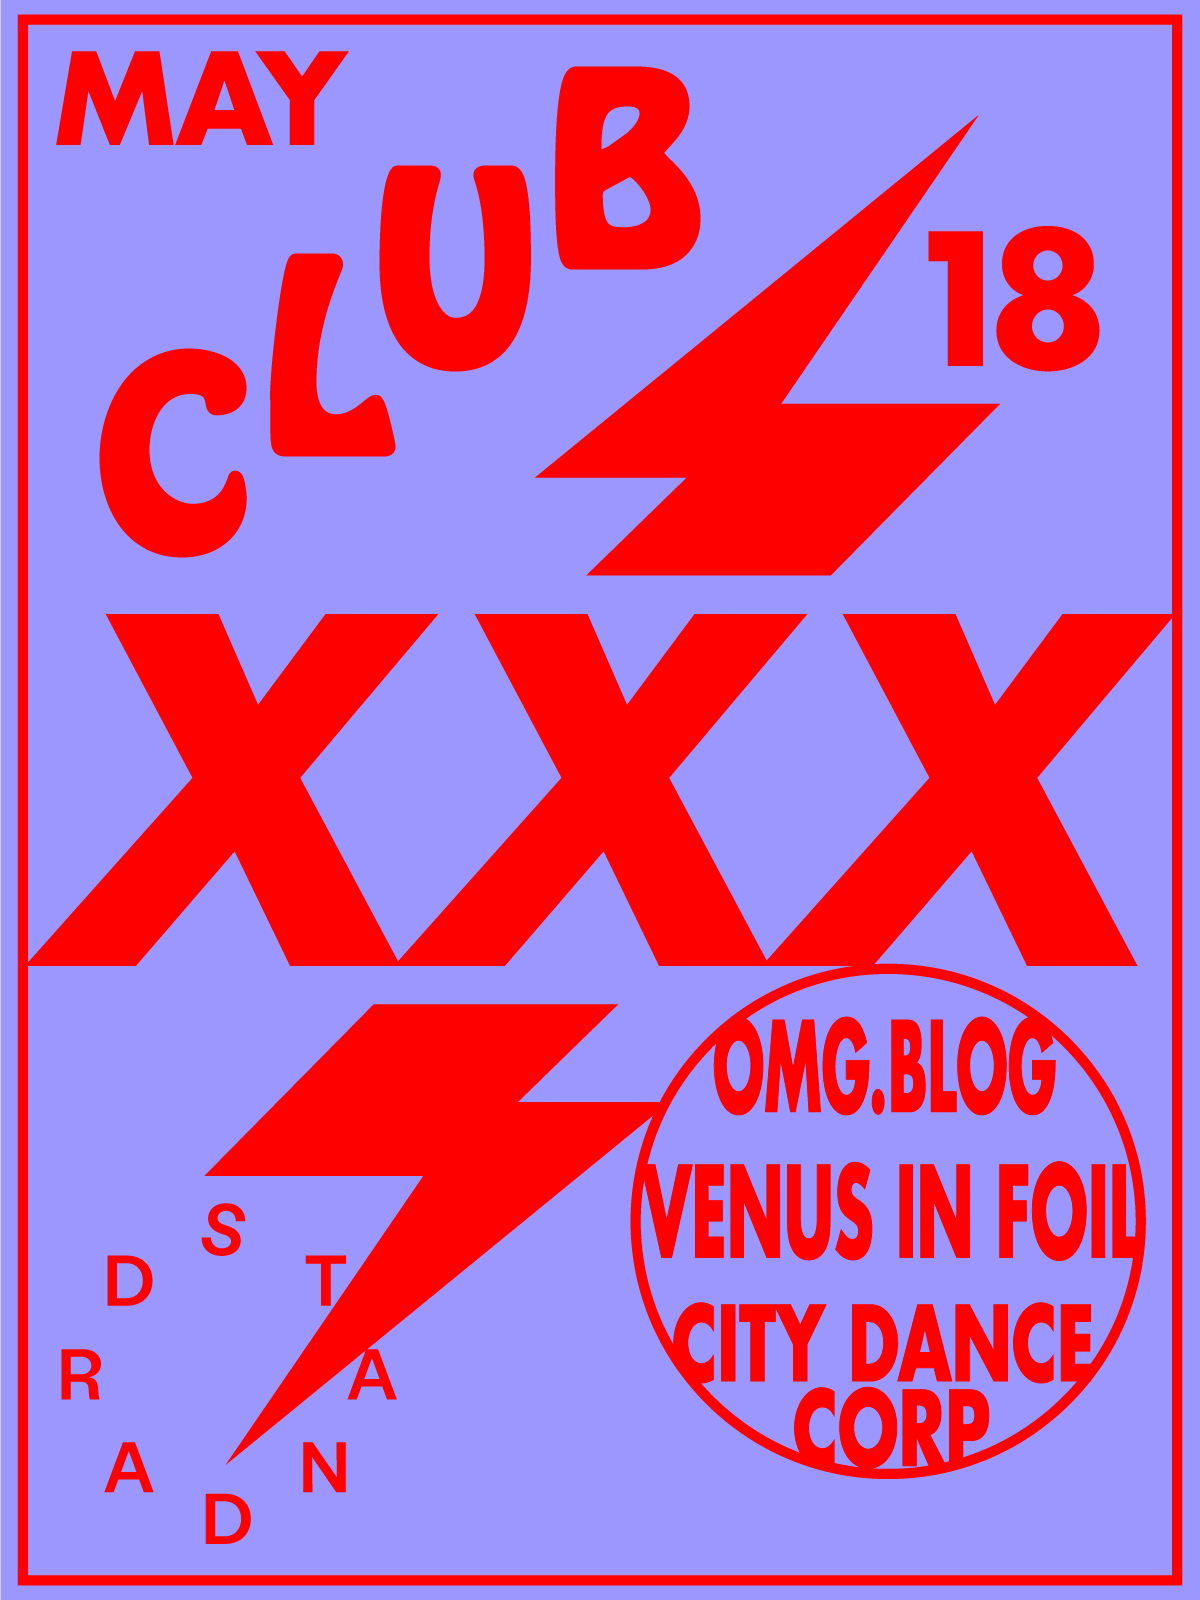 125: Club XXX featuring OMG.BLOG, Venus in Foil and City Dance Corporation  - フライヤー裏